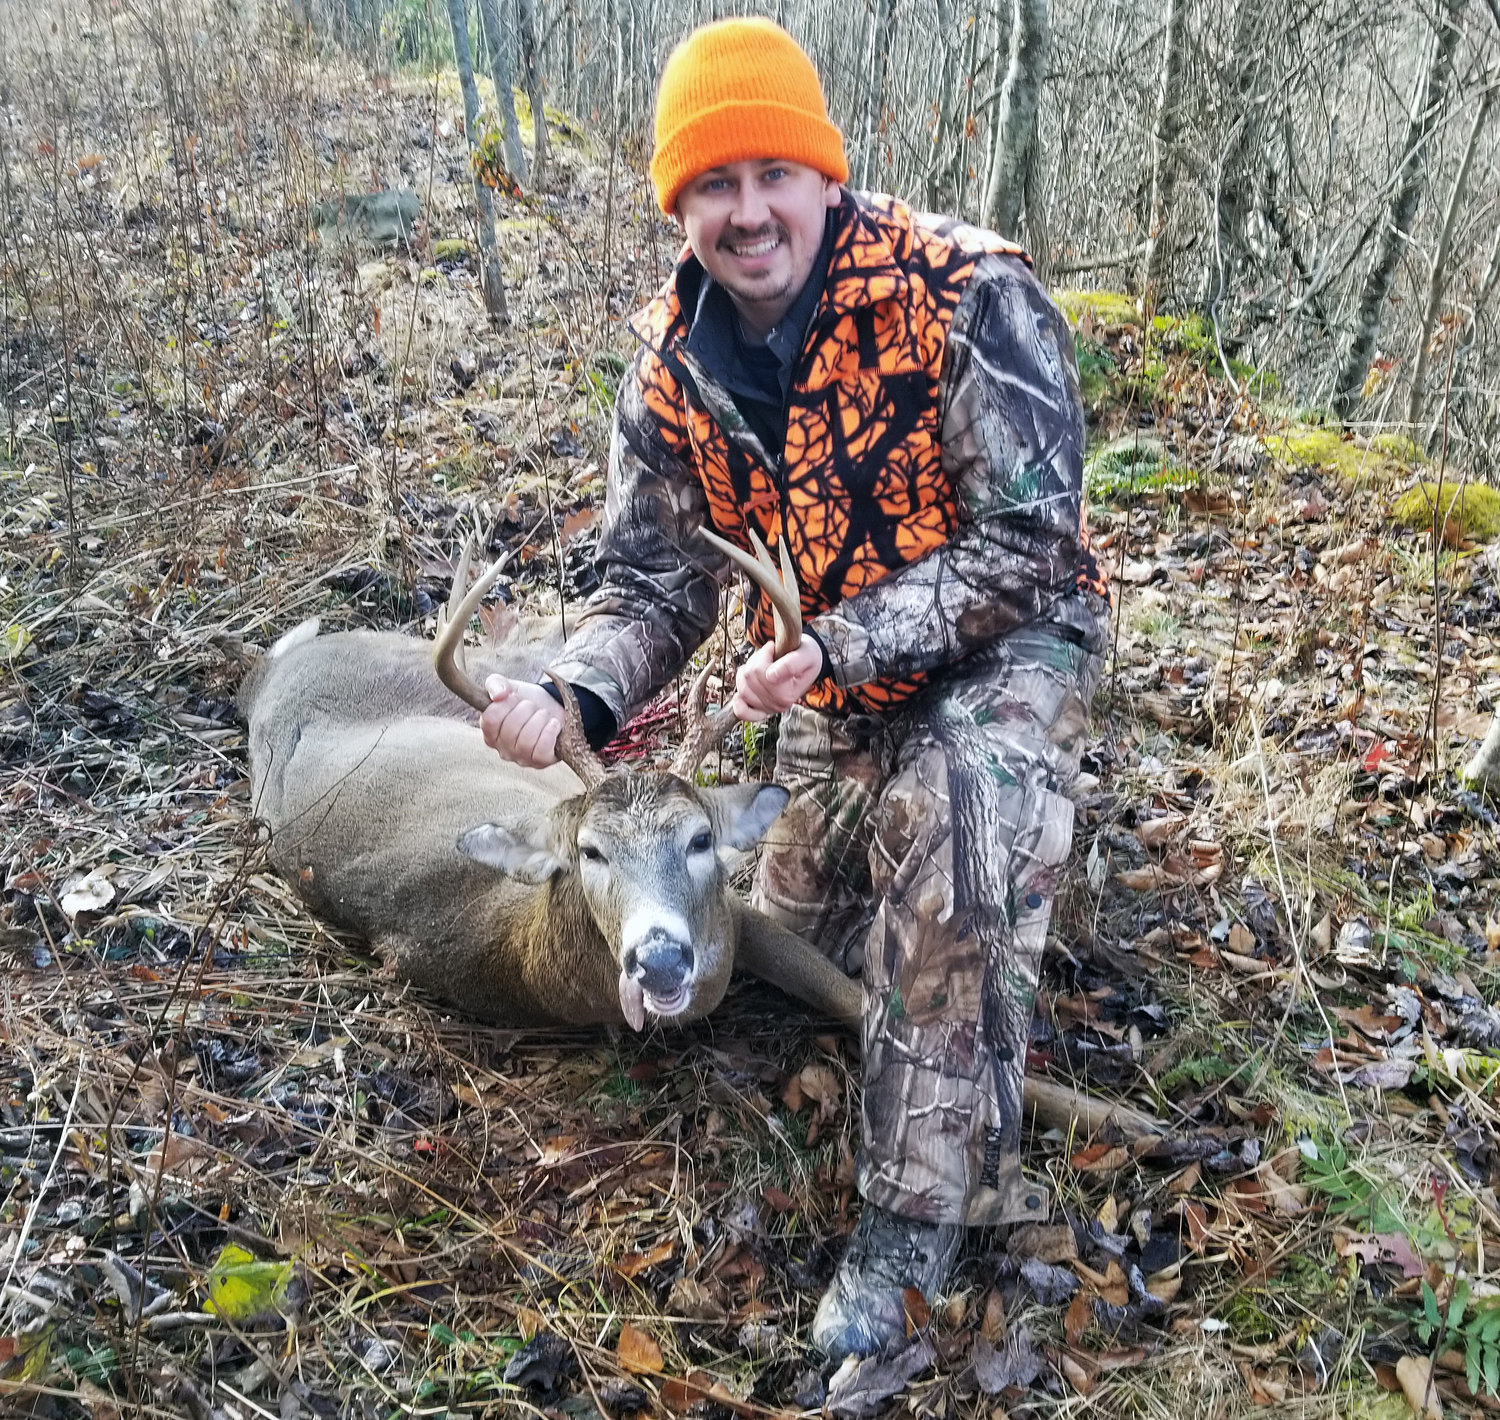 Sports editor Chris Siers took this eight-point buck over Thanksgiving week in West Virginia while hunting with his family.